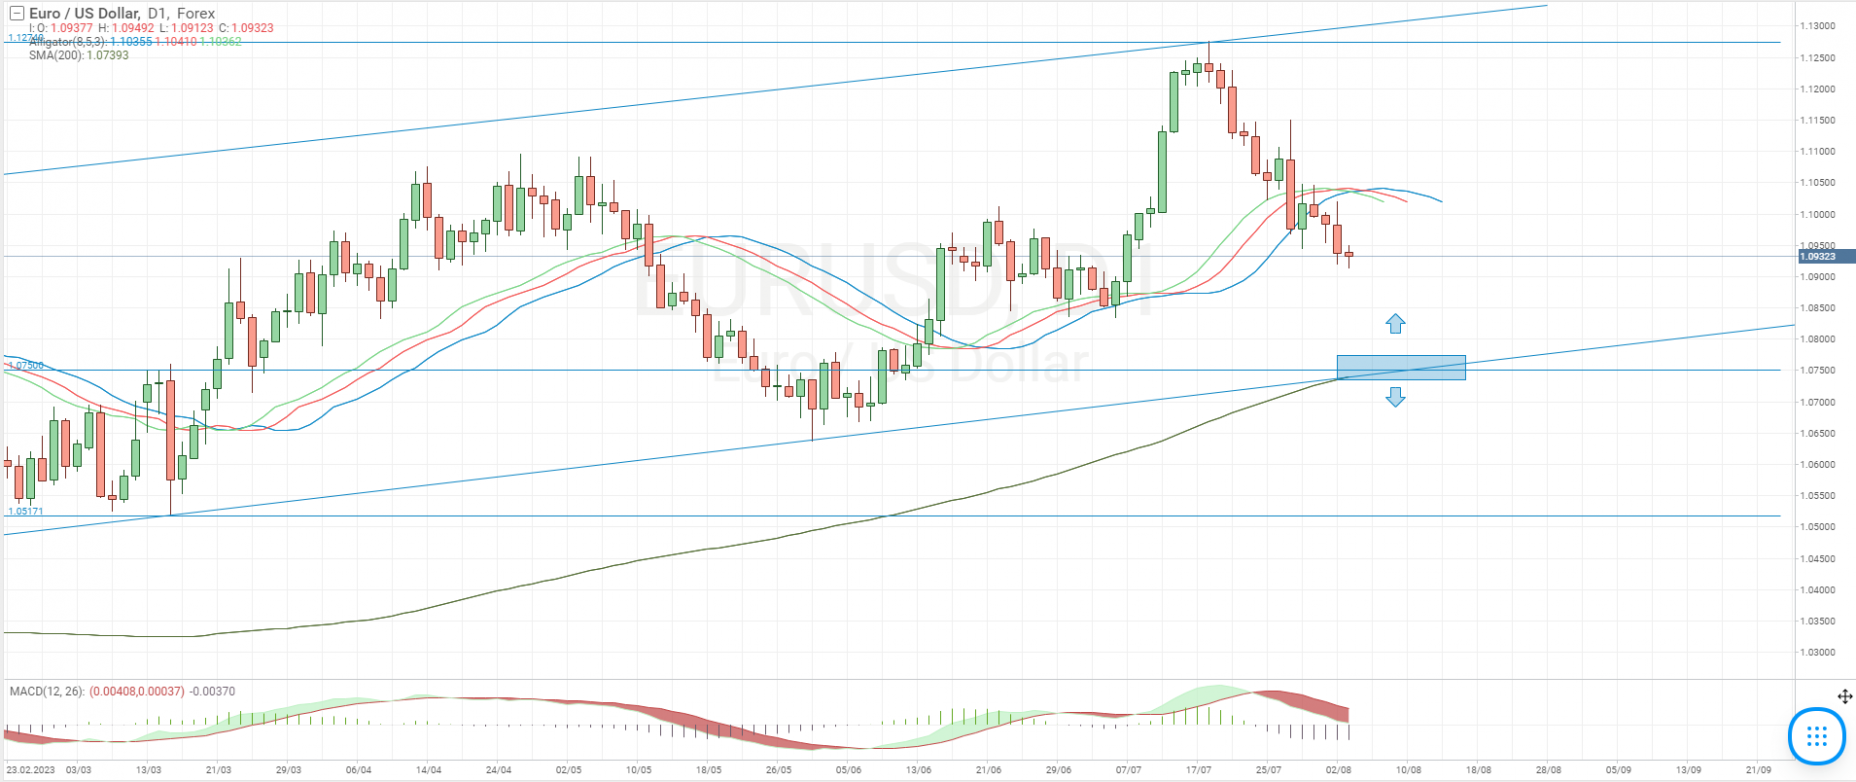 Technical analysis of the EUR/USD currency pair